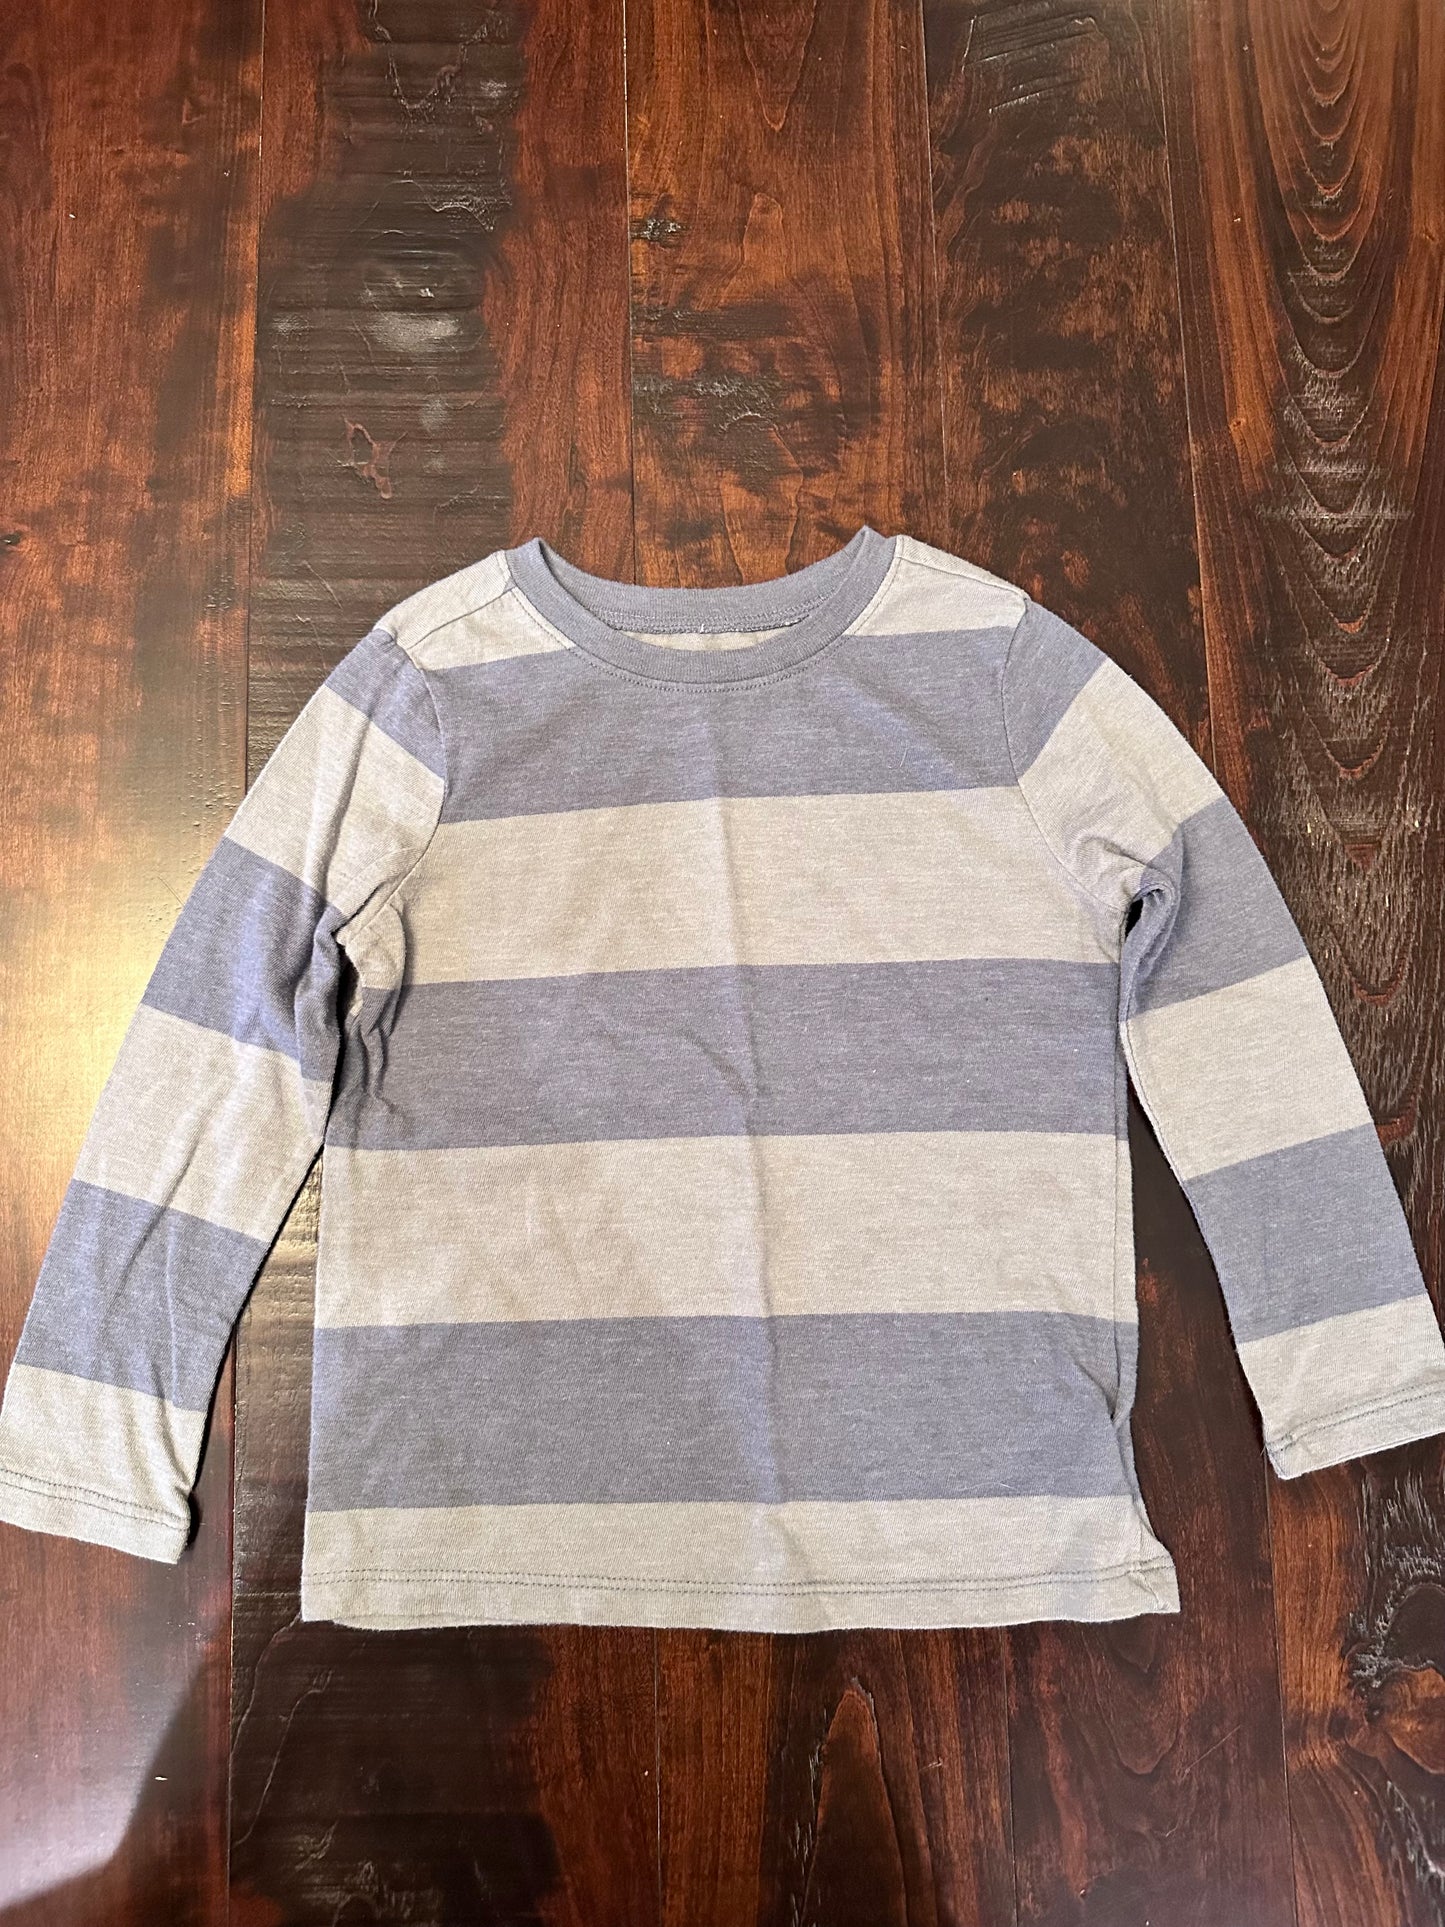 Old Navy - Striped Long Sleeve Tshirt - Boys Size 4T